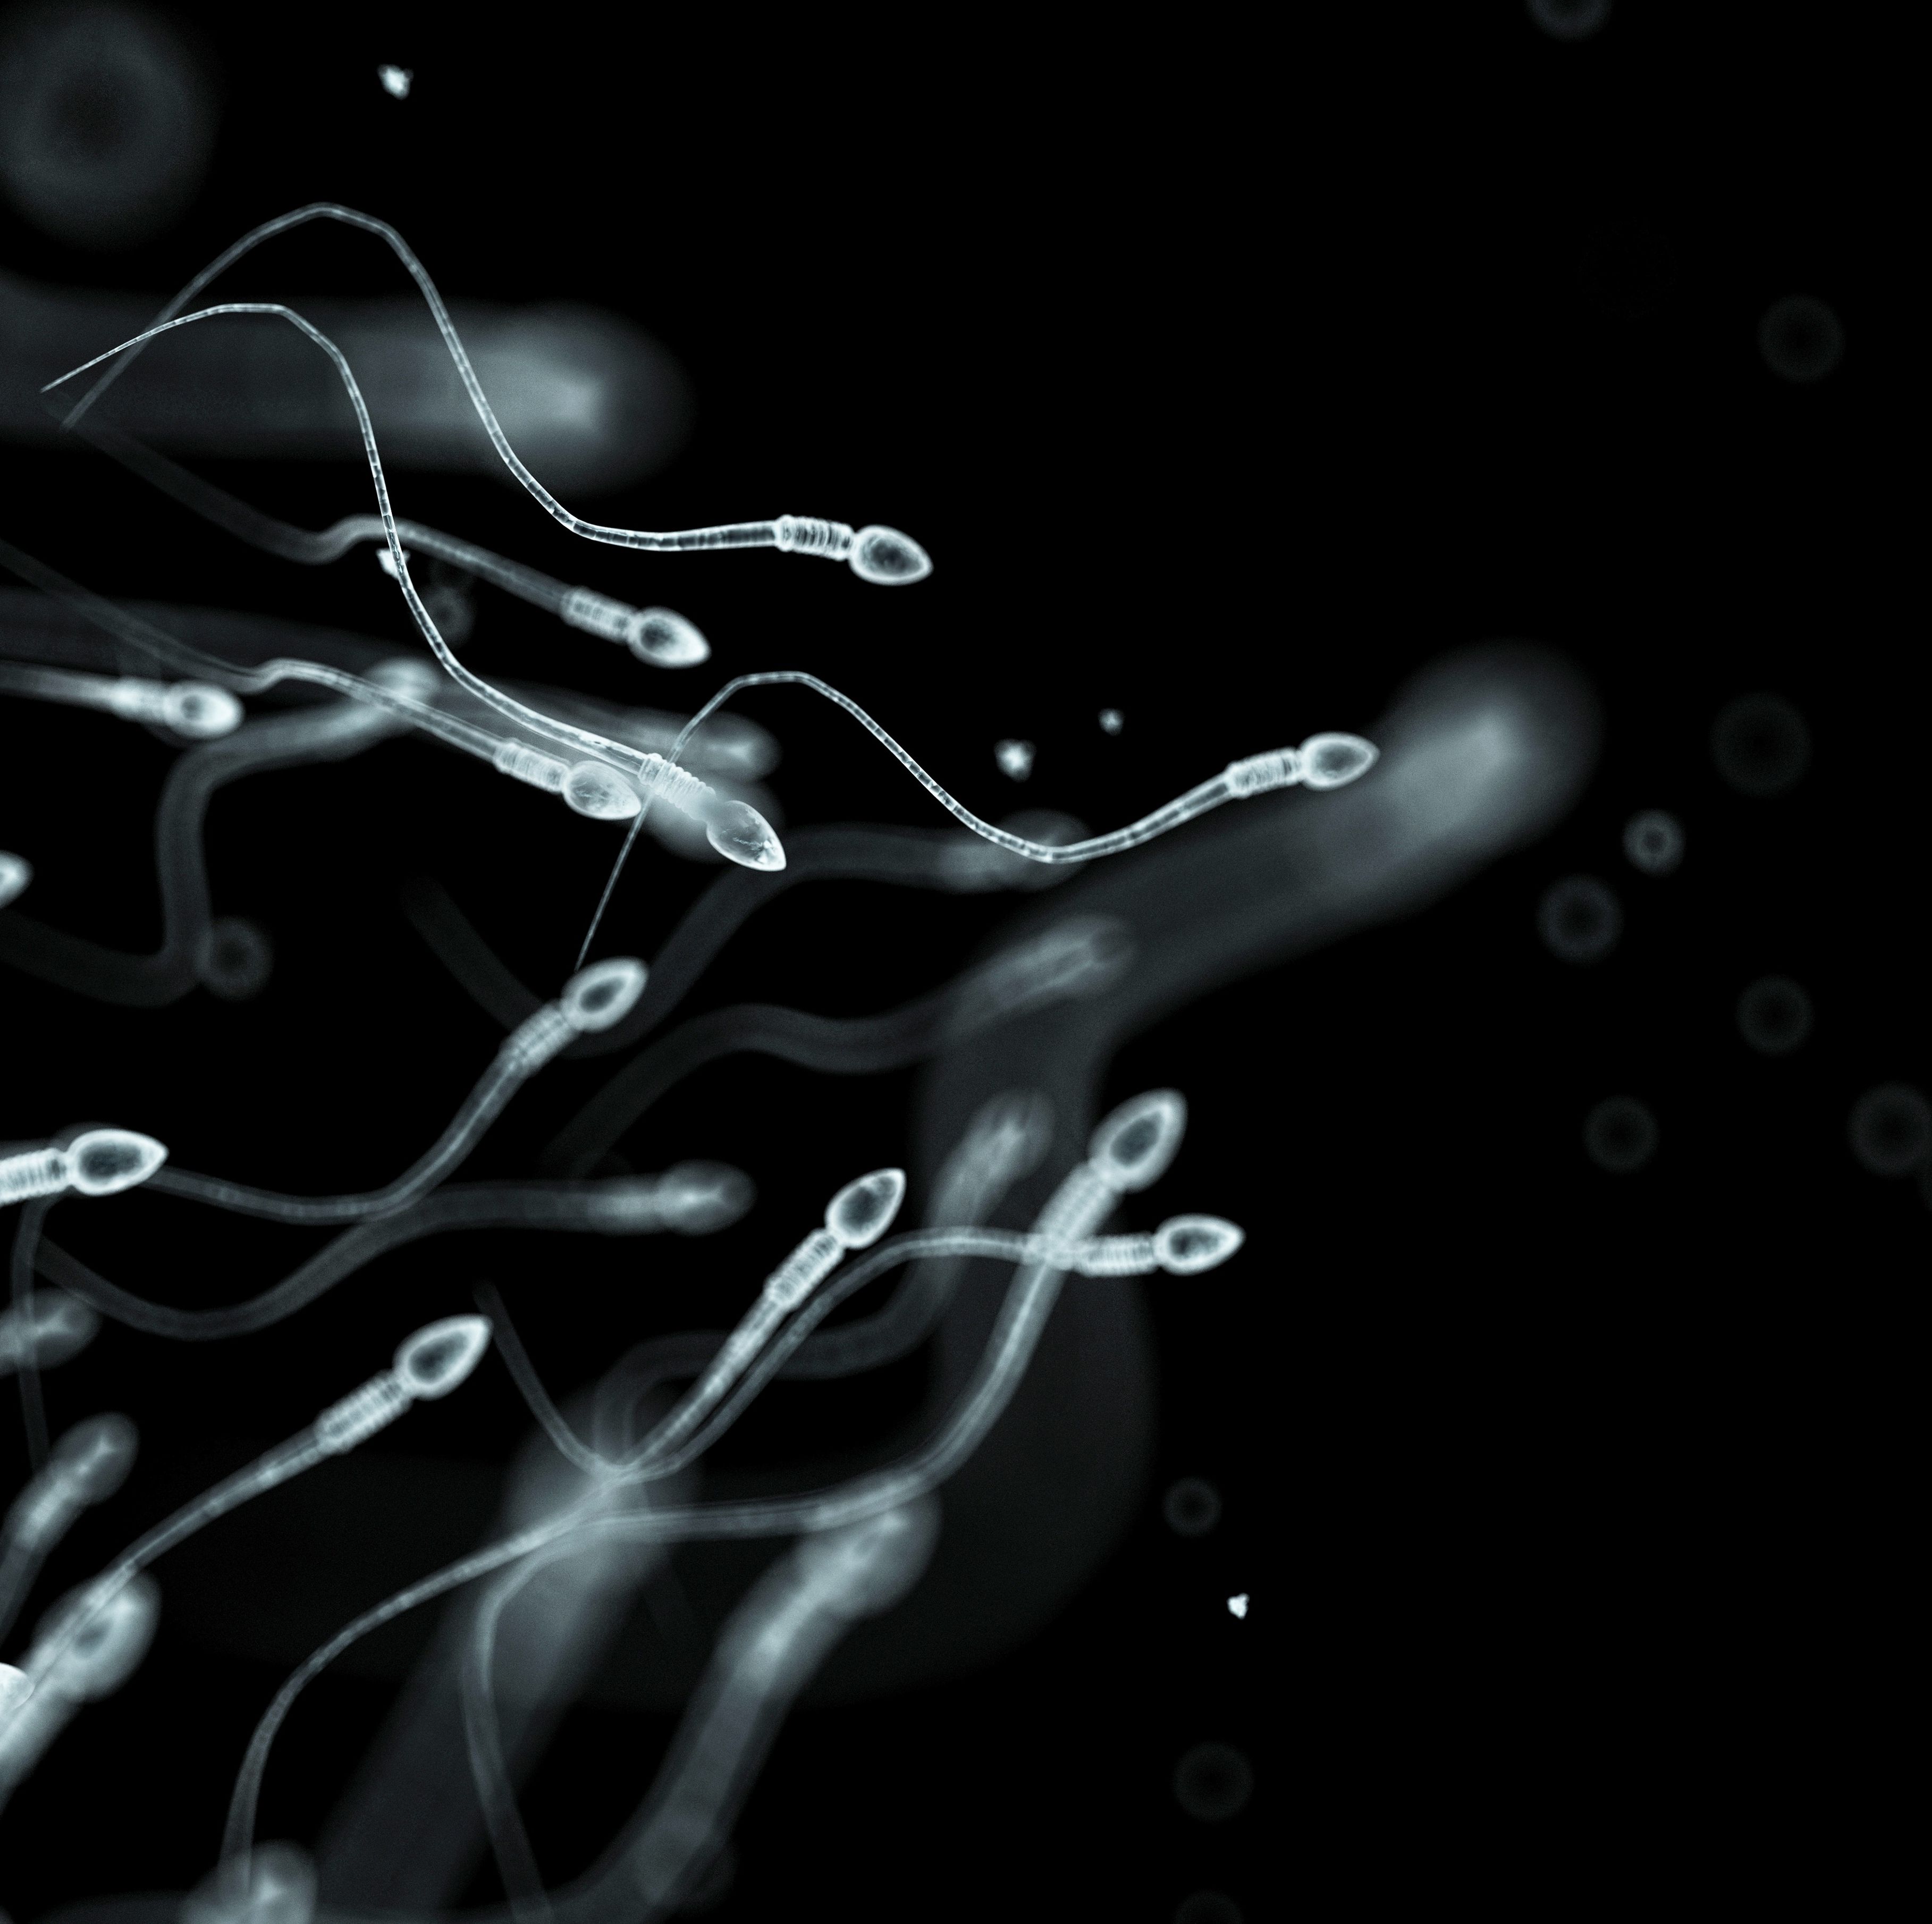 How Human Sperm and Other 'Microswimmers' Are Making Scientists Rethink the Laws of Physics